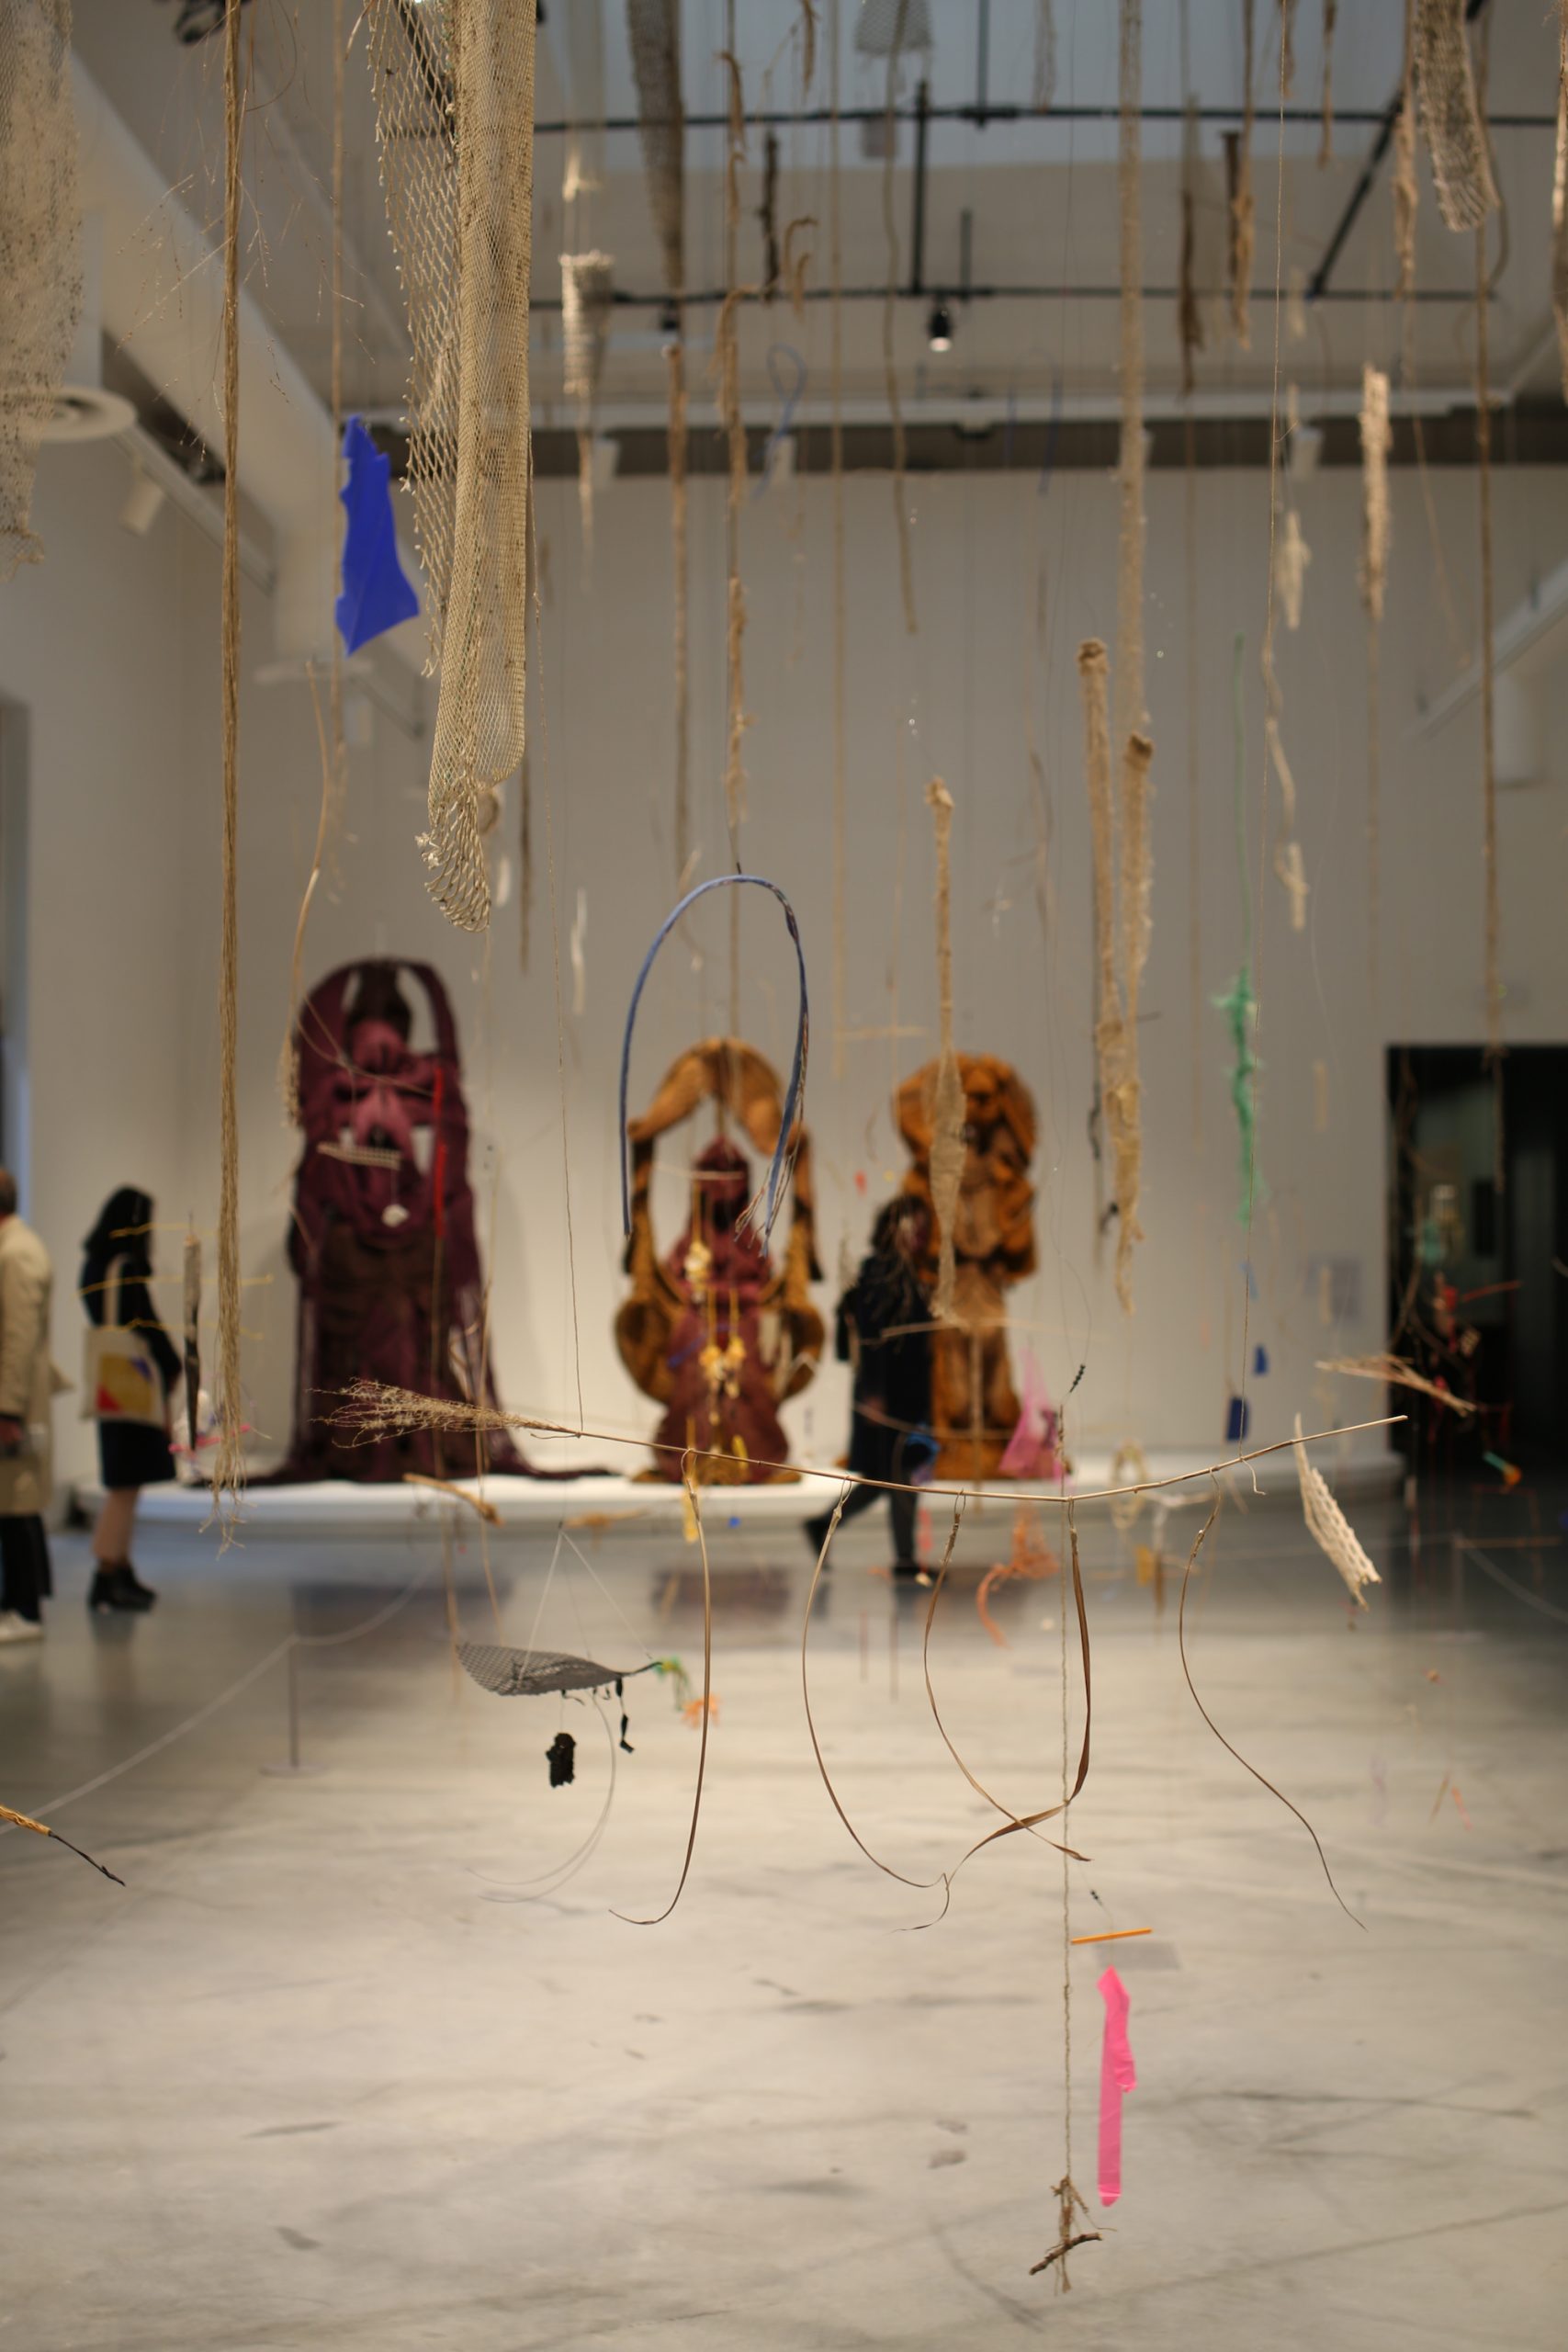 Cecilia Vicuña installation (foreground), Mrinalini Mukherjee rope sculptures (background) at the Giardini central pavilion. Photo by Louise Benson